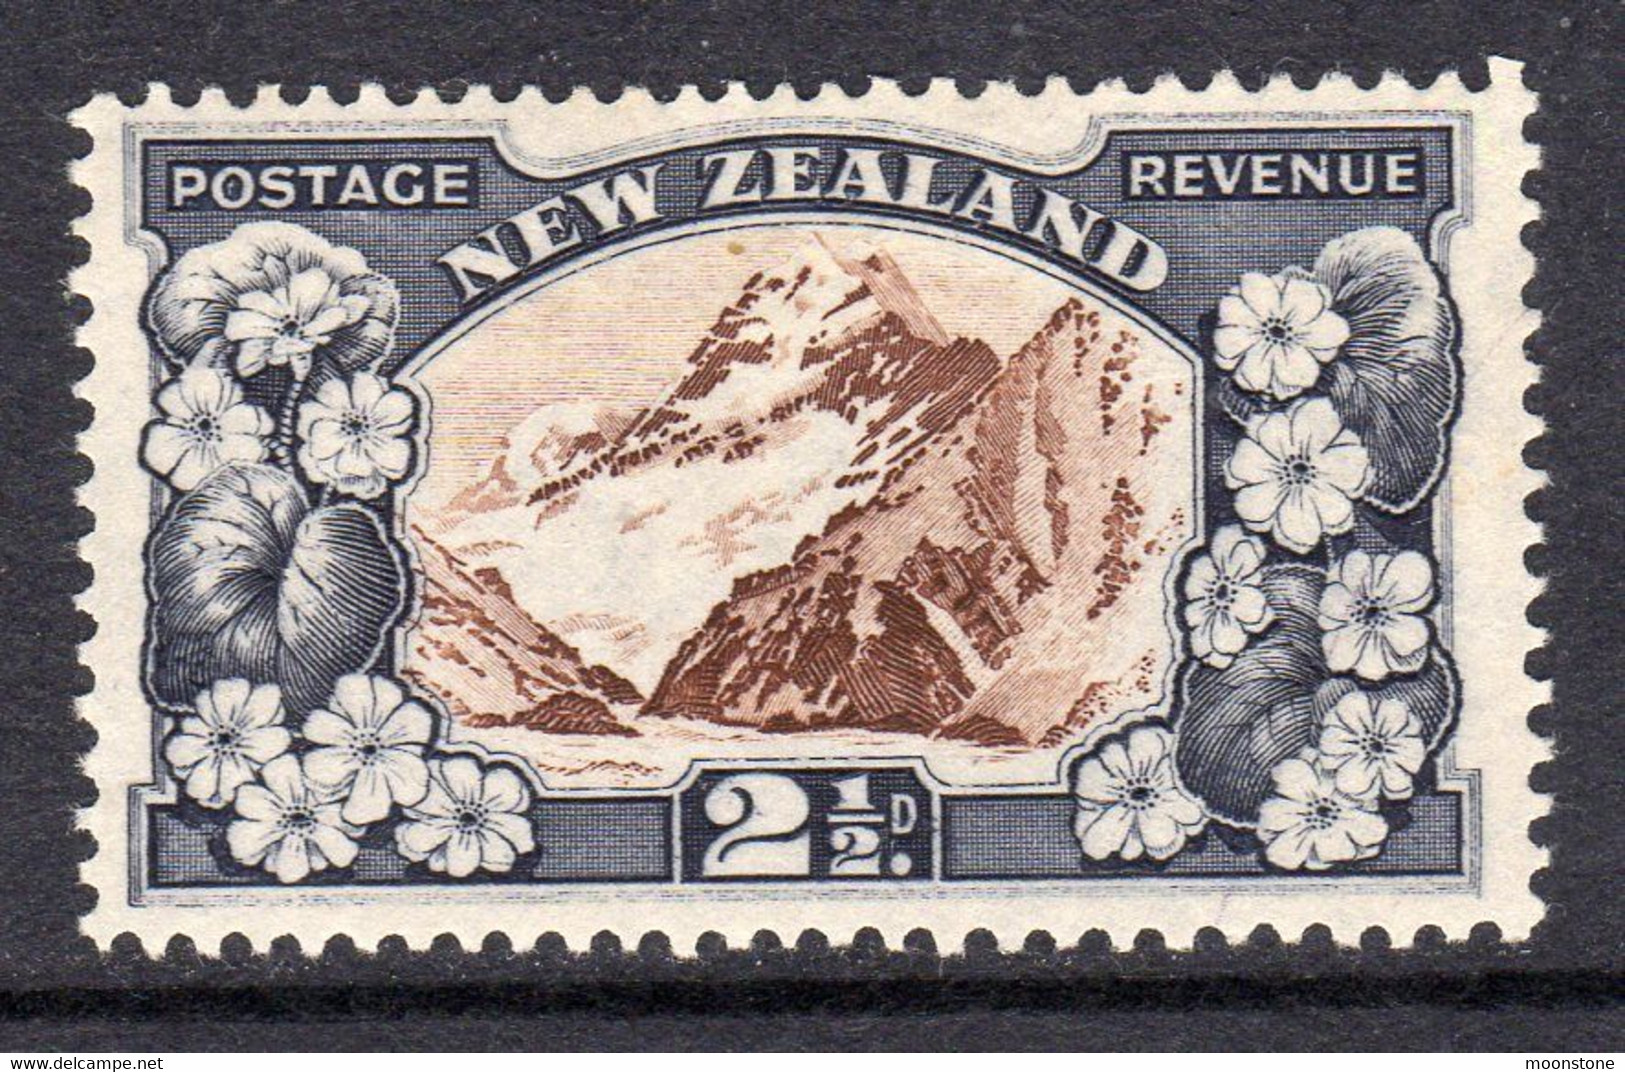 New Zealand GV 1936-42 2½d Mount Cook Definitive, Wmk. Multiple NZ & Star, Perf. 14x13½, Hinged Mint, SG 581 (A) - Nuevos